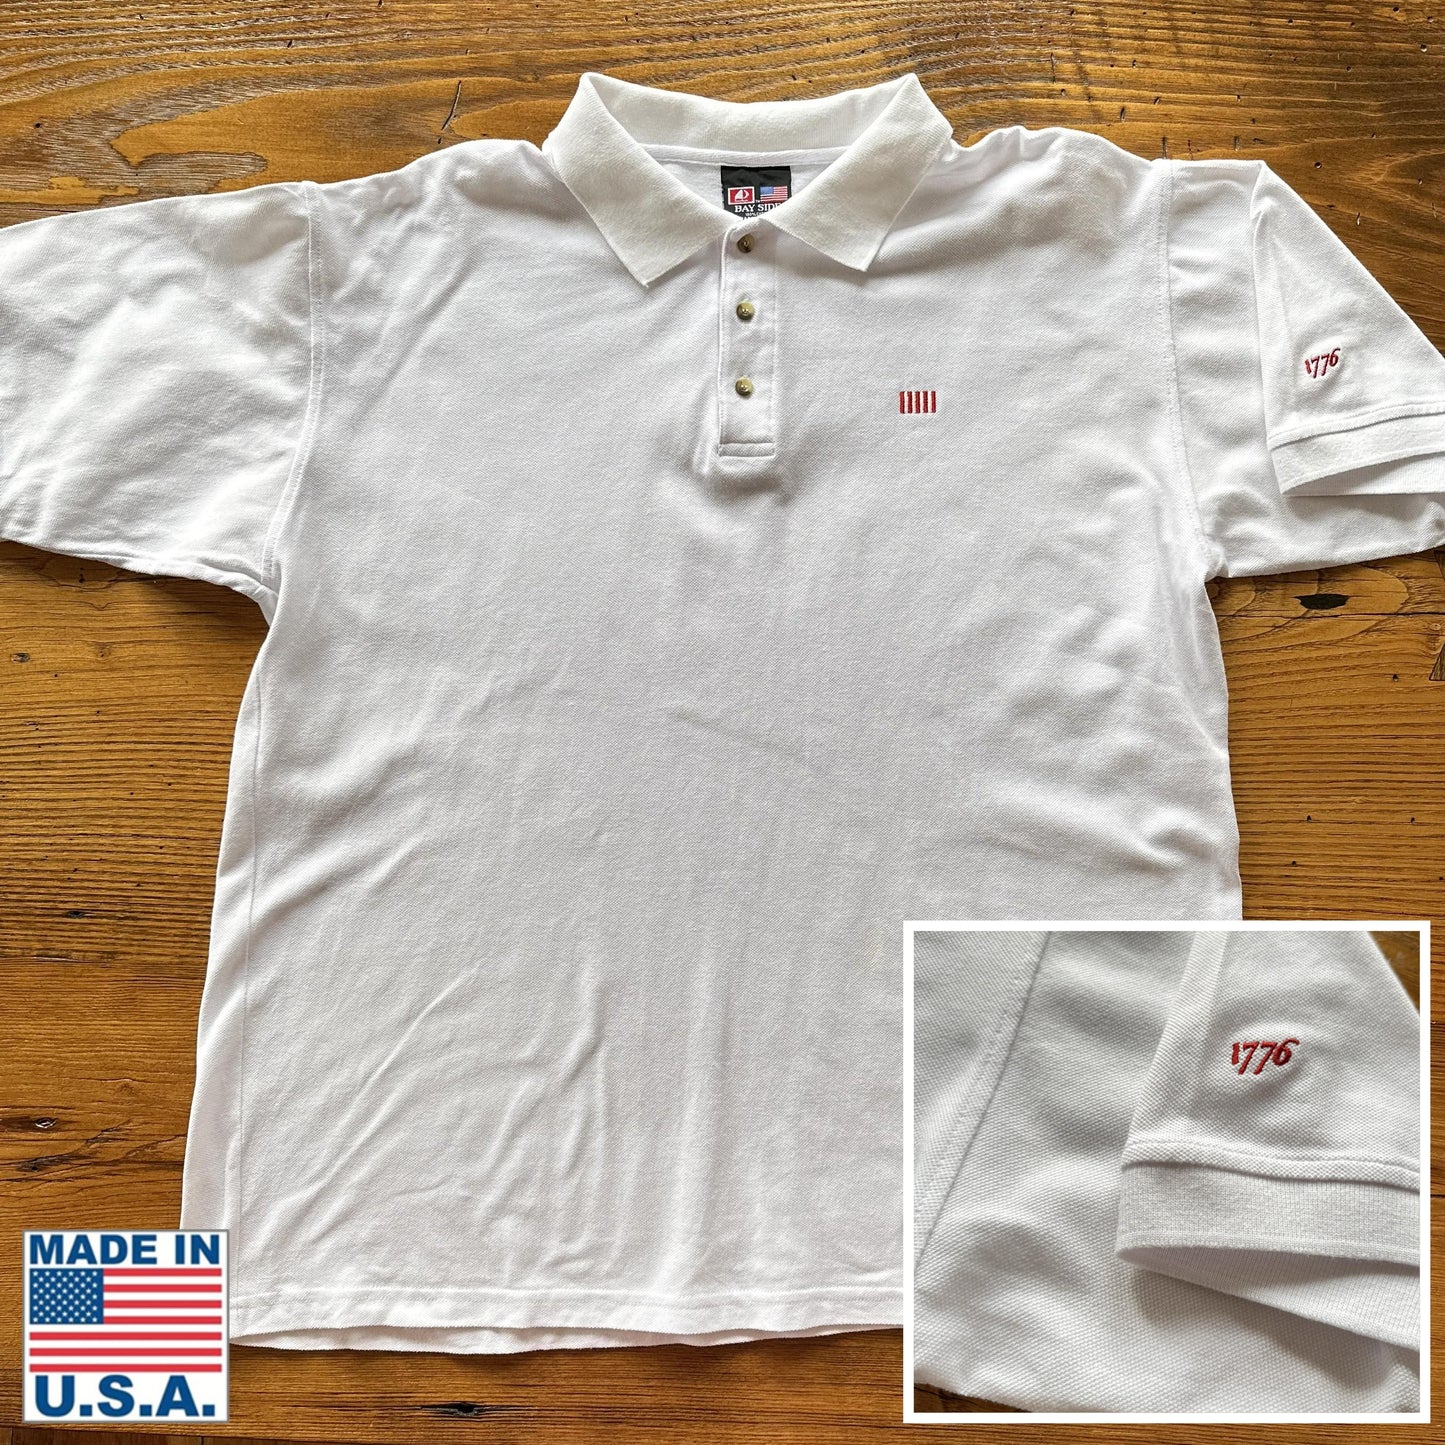 "Sons of Liberty" 1776 Polo shirt — White — Only one in 2XL